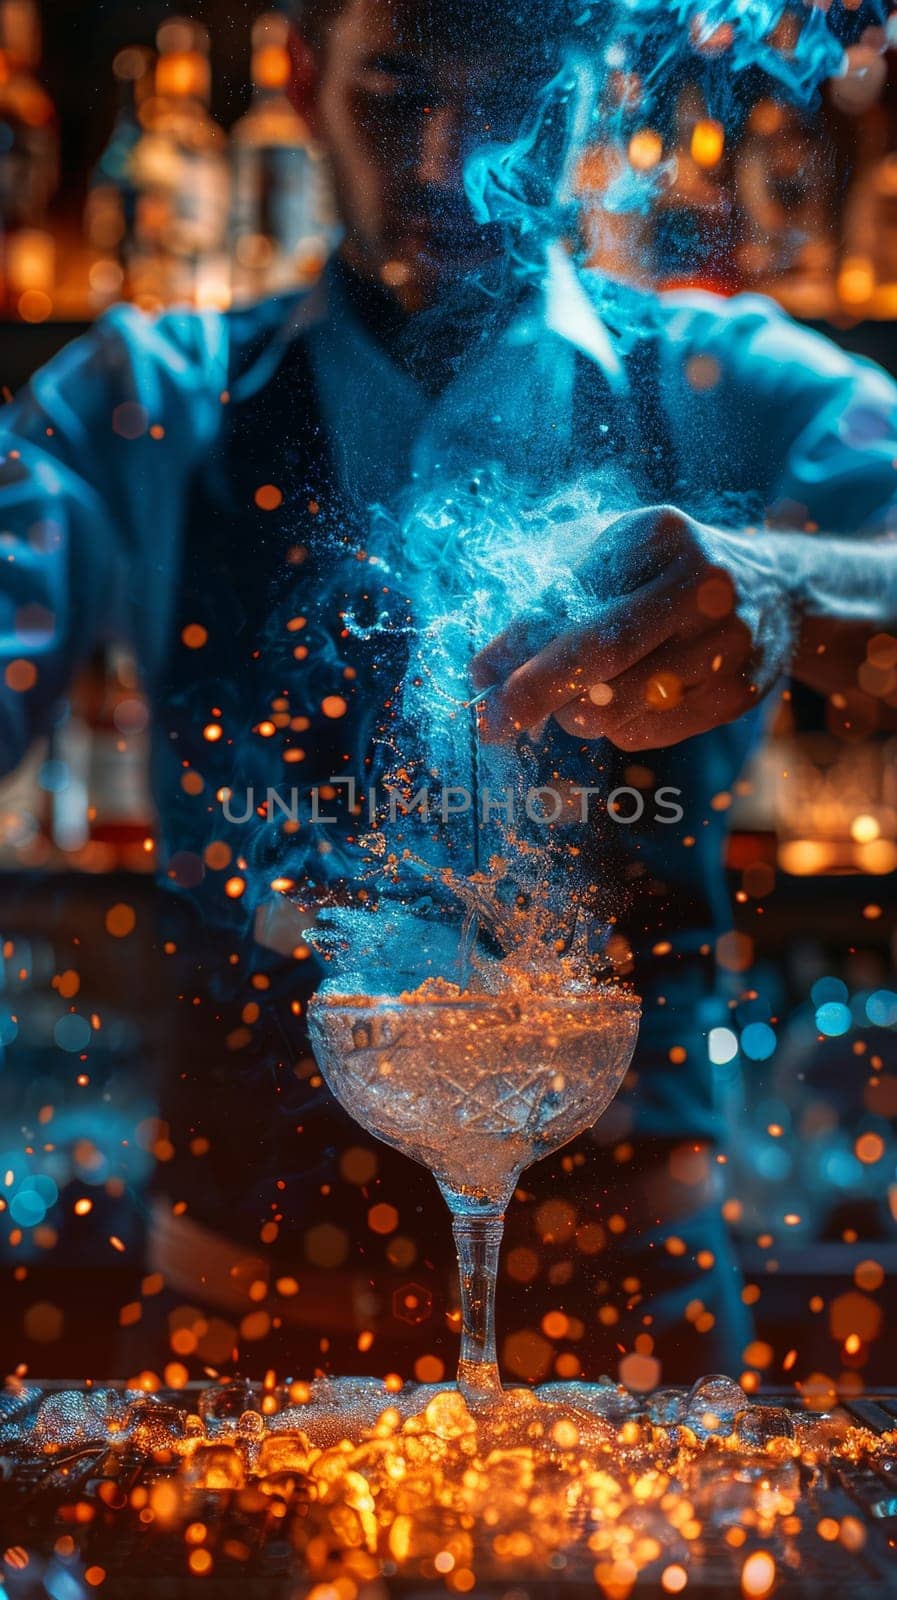 A bartender is pouring a drink into a glass with a blue flame by itchaznong